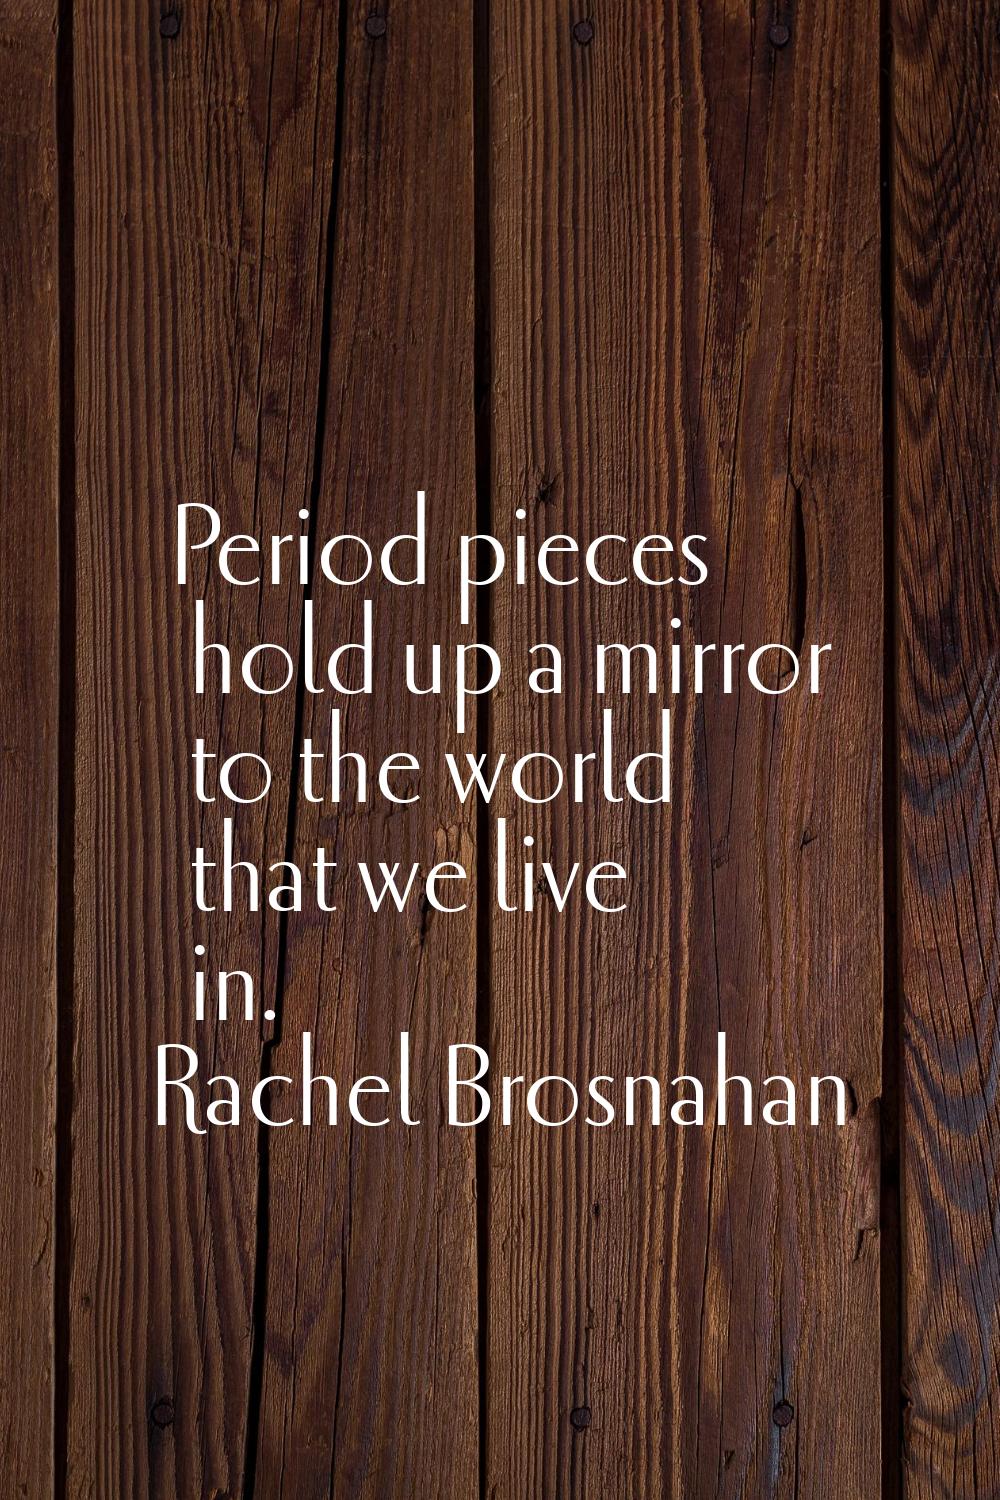 Period pieces hold up a mirror to the world that we live in.